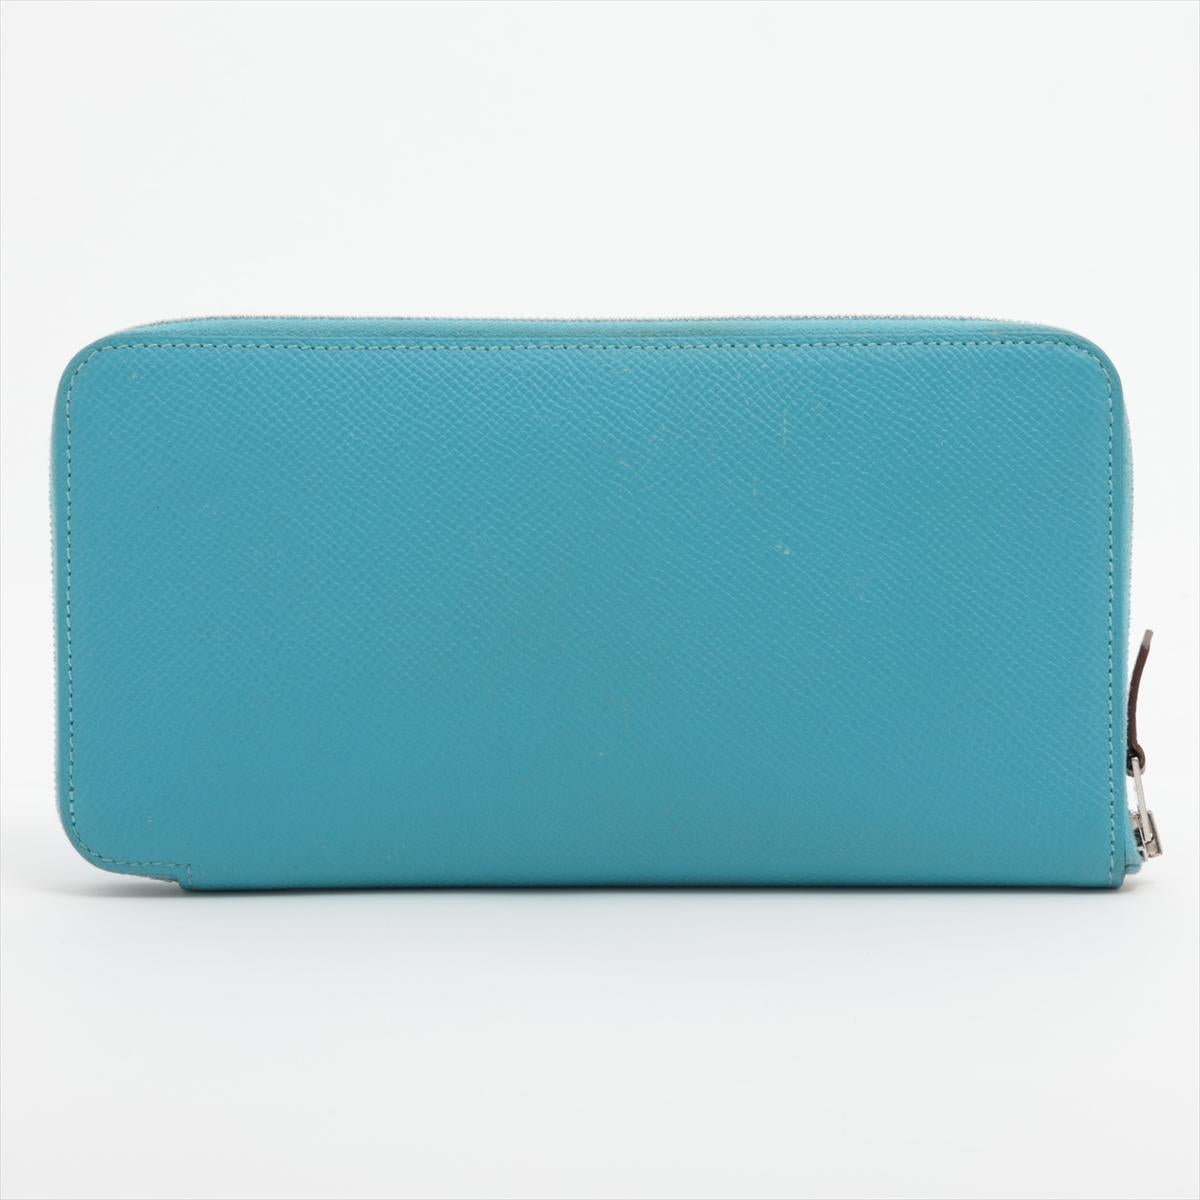 Hermès Azap Veau Epsom Long Wallet  Blue Atoll In Good Condition For Sale In Indianapolis, IN